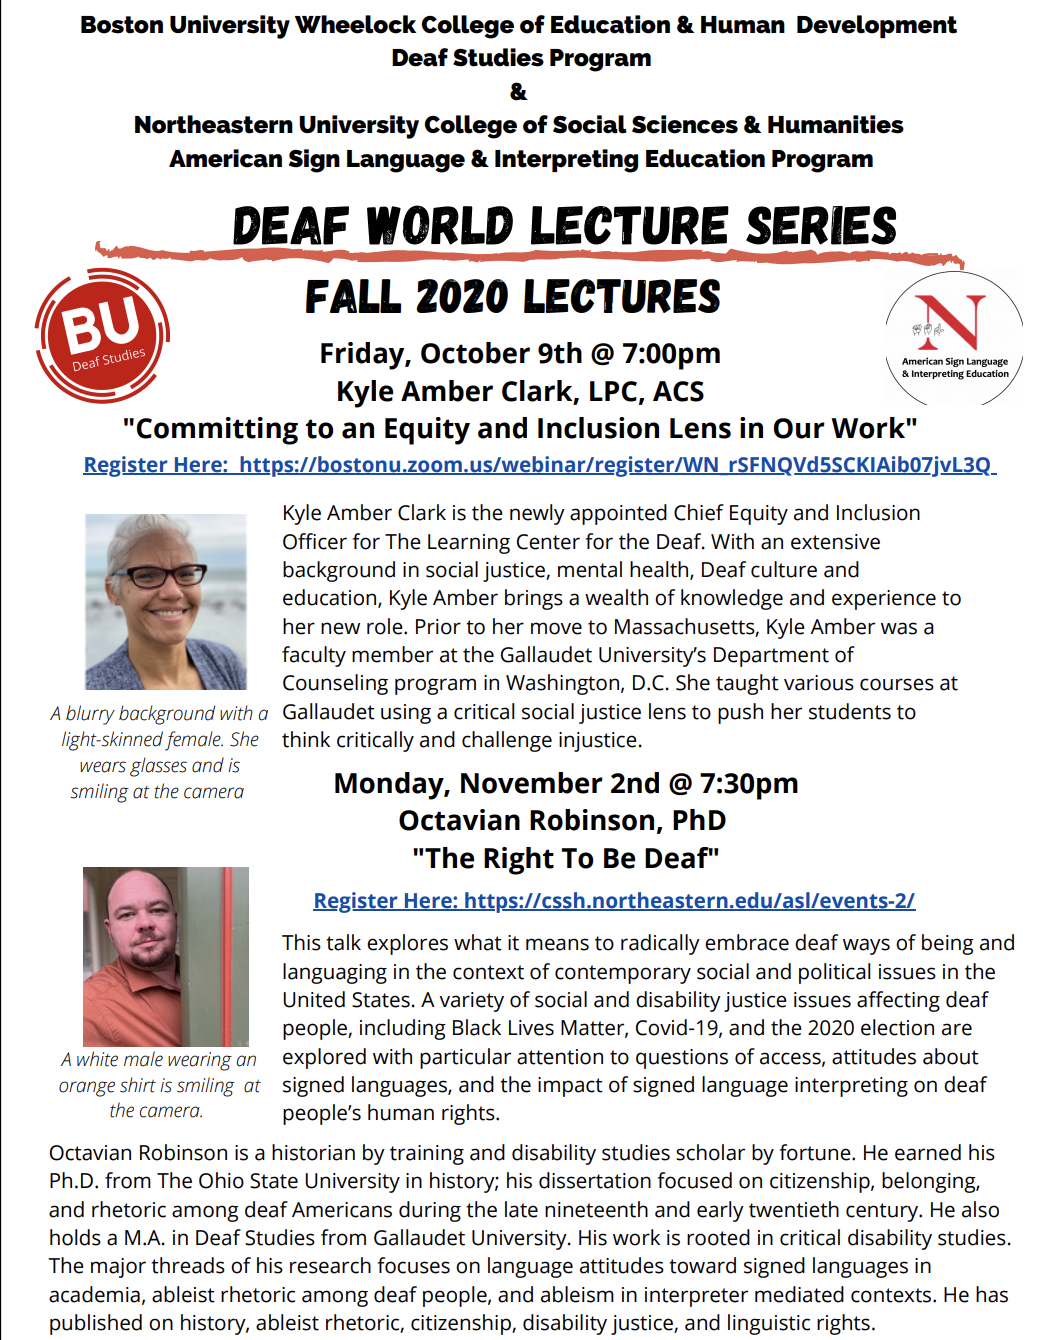 Flyer for upcoming Deaf World Lecture Events